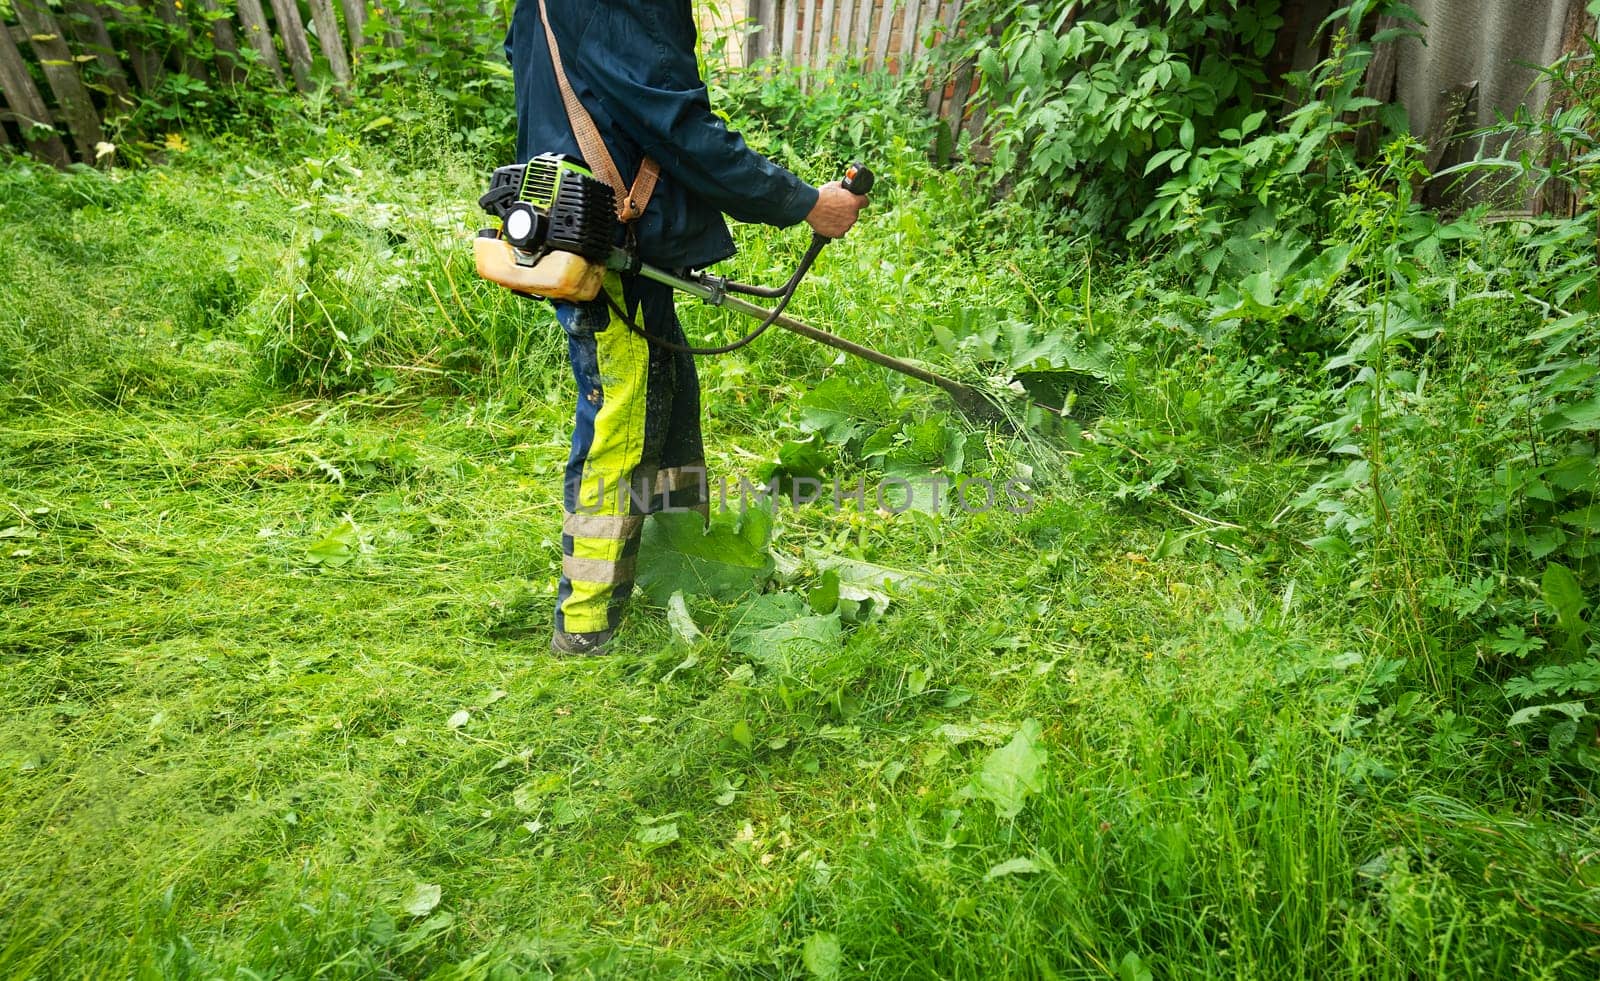 A man in a protective suit mows the grass, a mower close-up. Lawn care near the house, garden